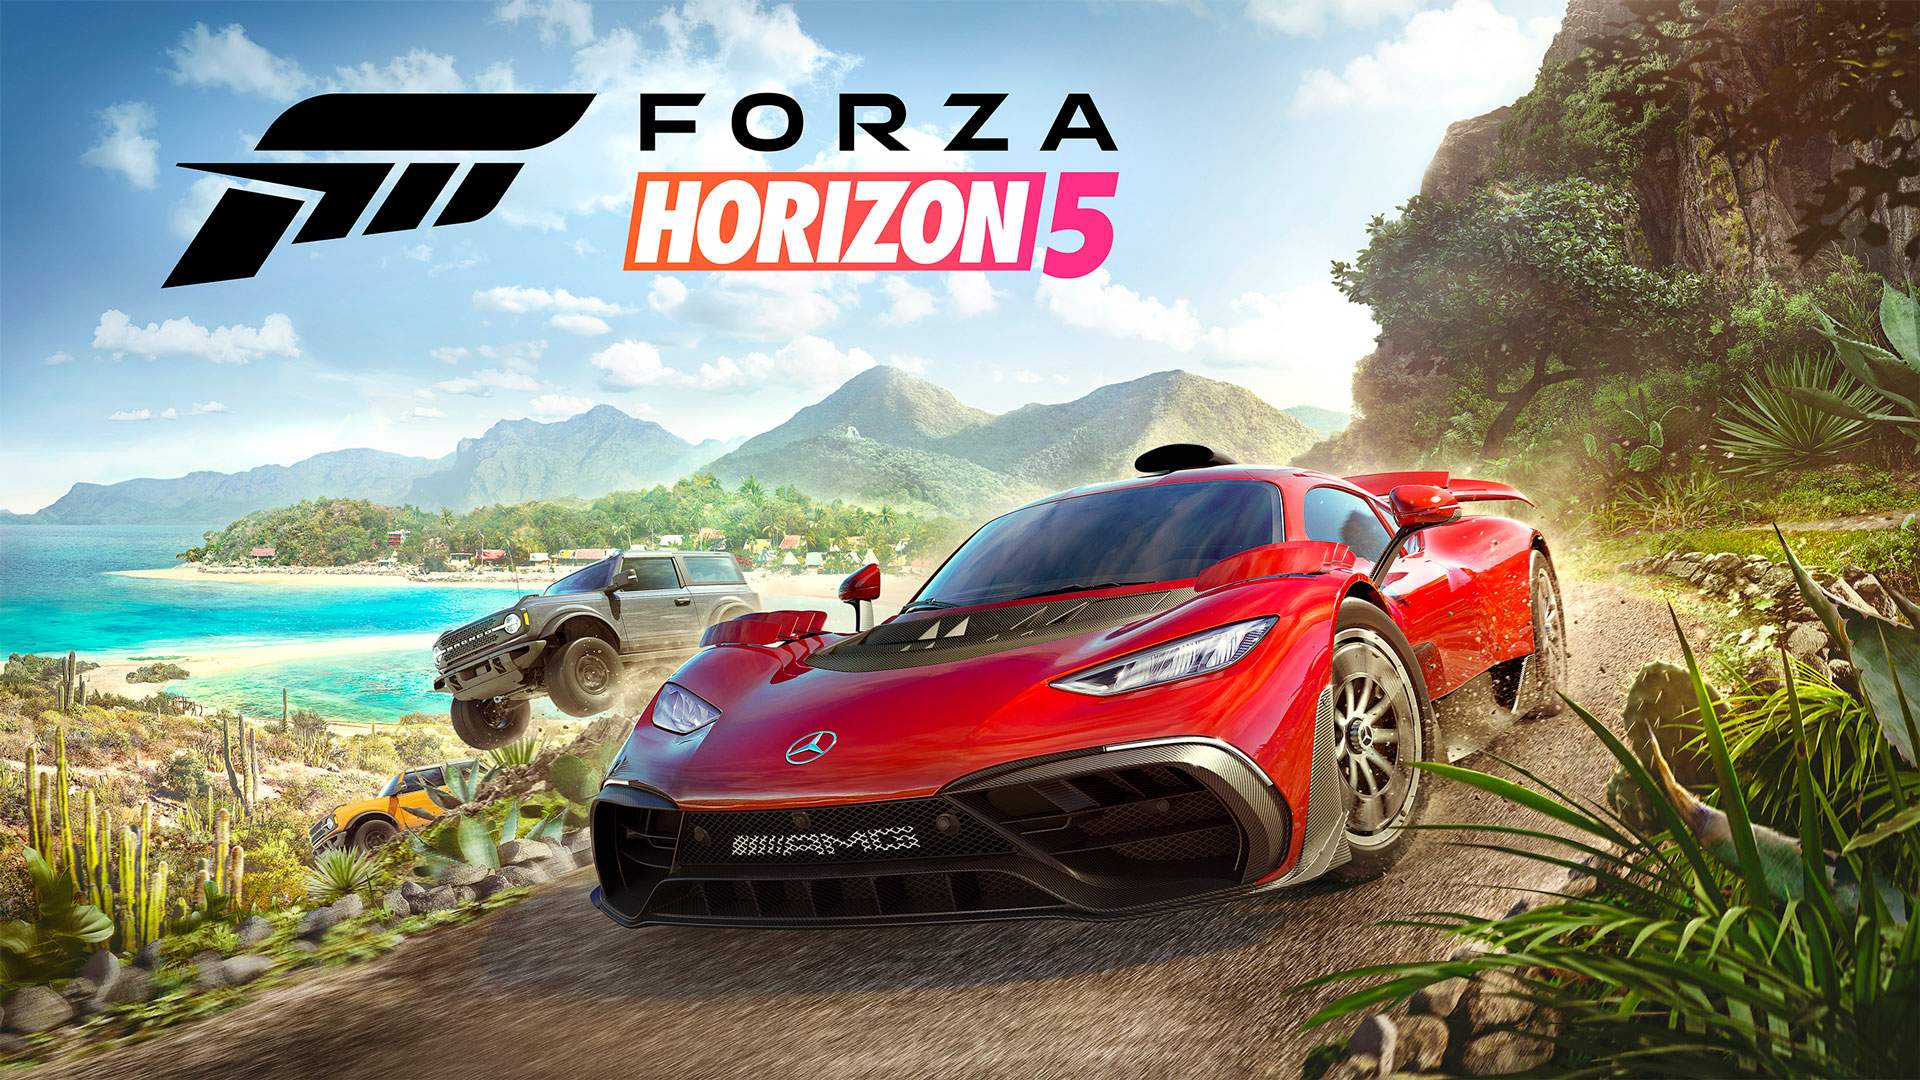 Forza Horizon 5 update for August 15